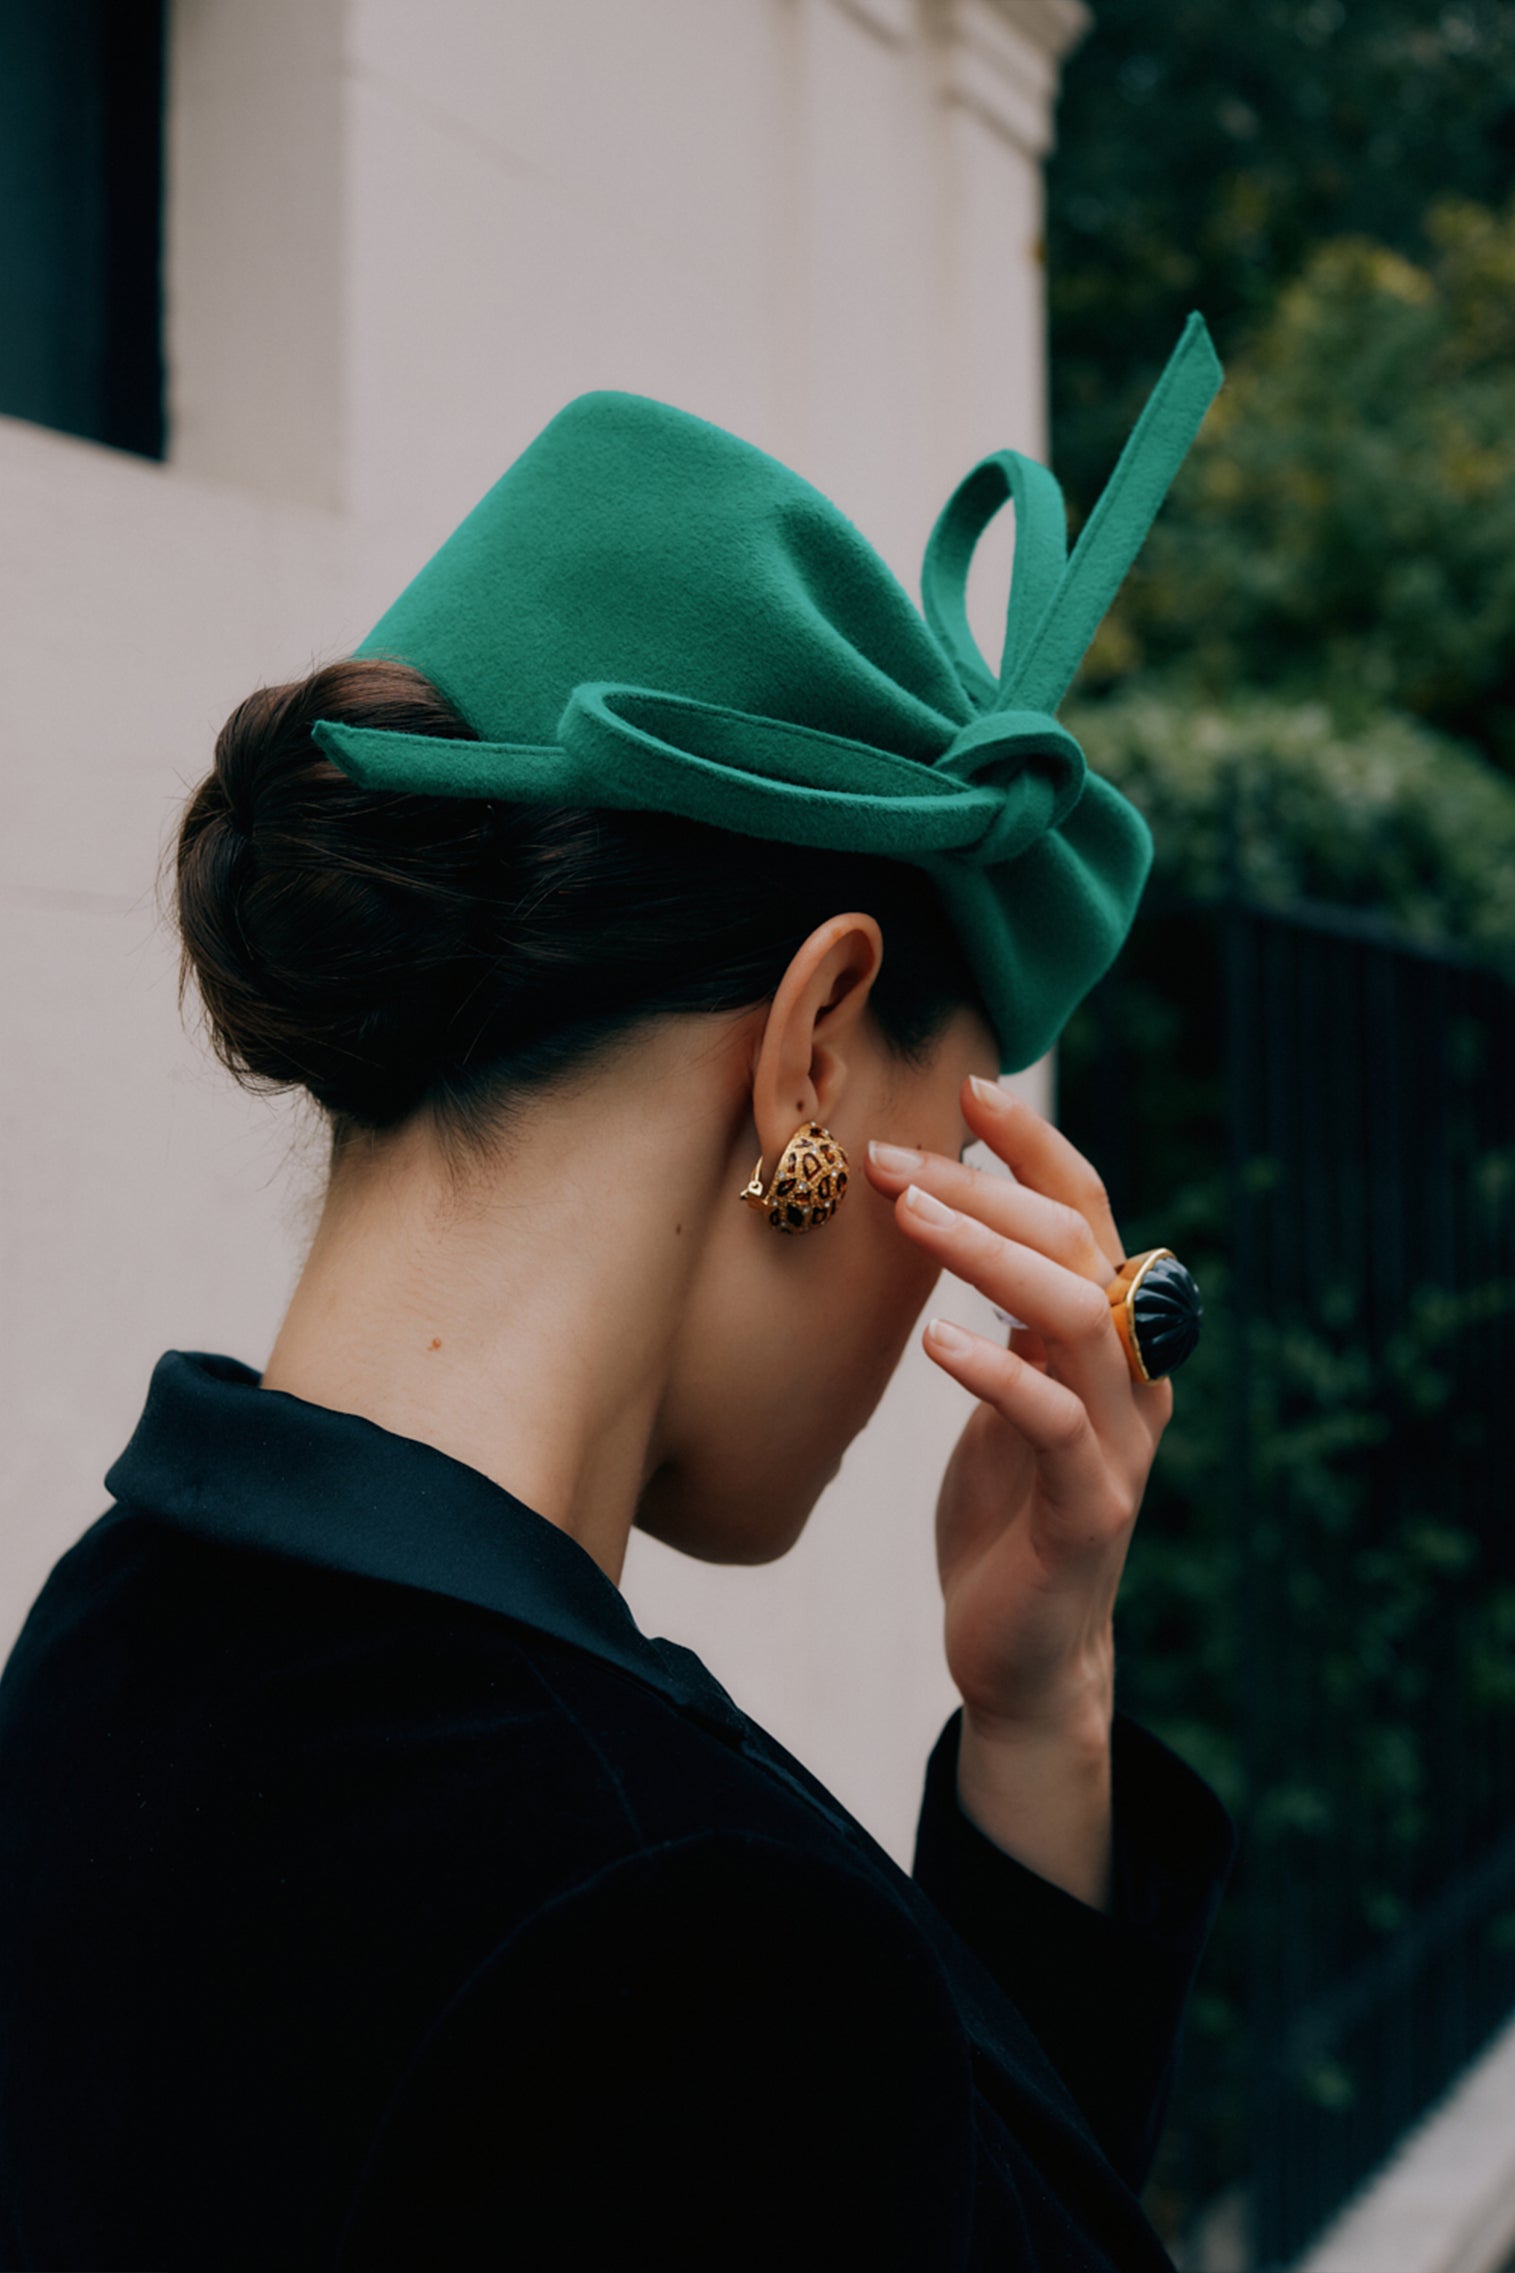 Mayfair Pillbox Hat - Mother's Day Gift Guide - Lock & Co. Hatters London UK